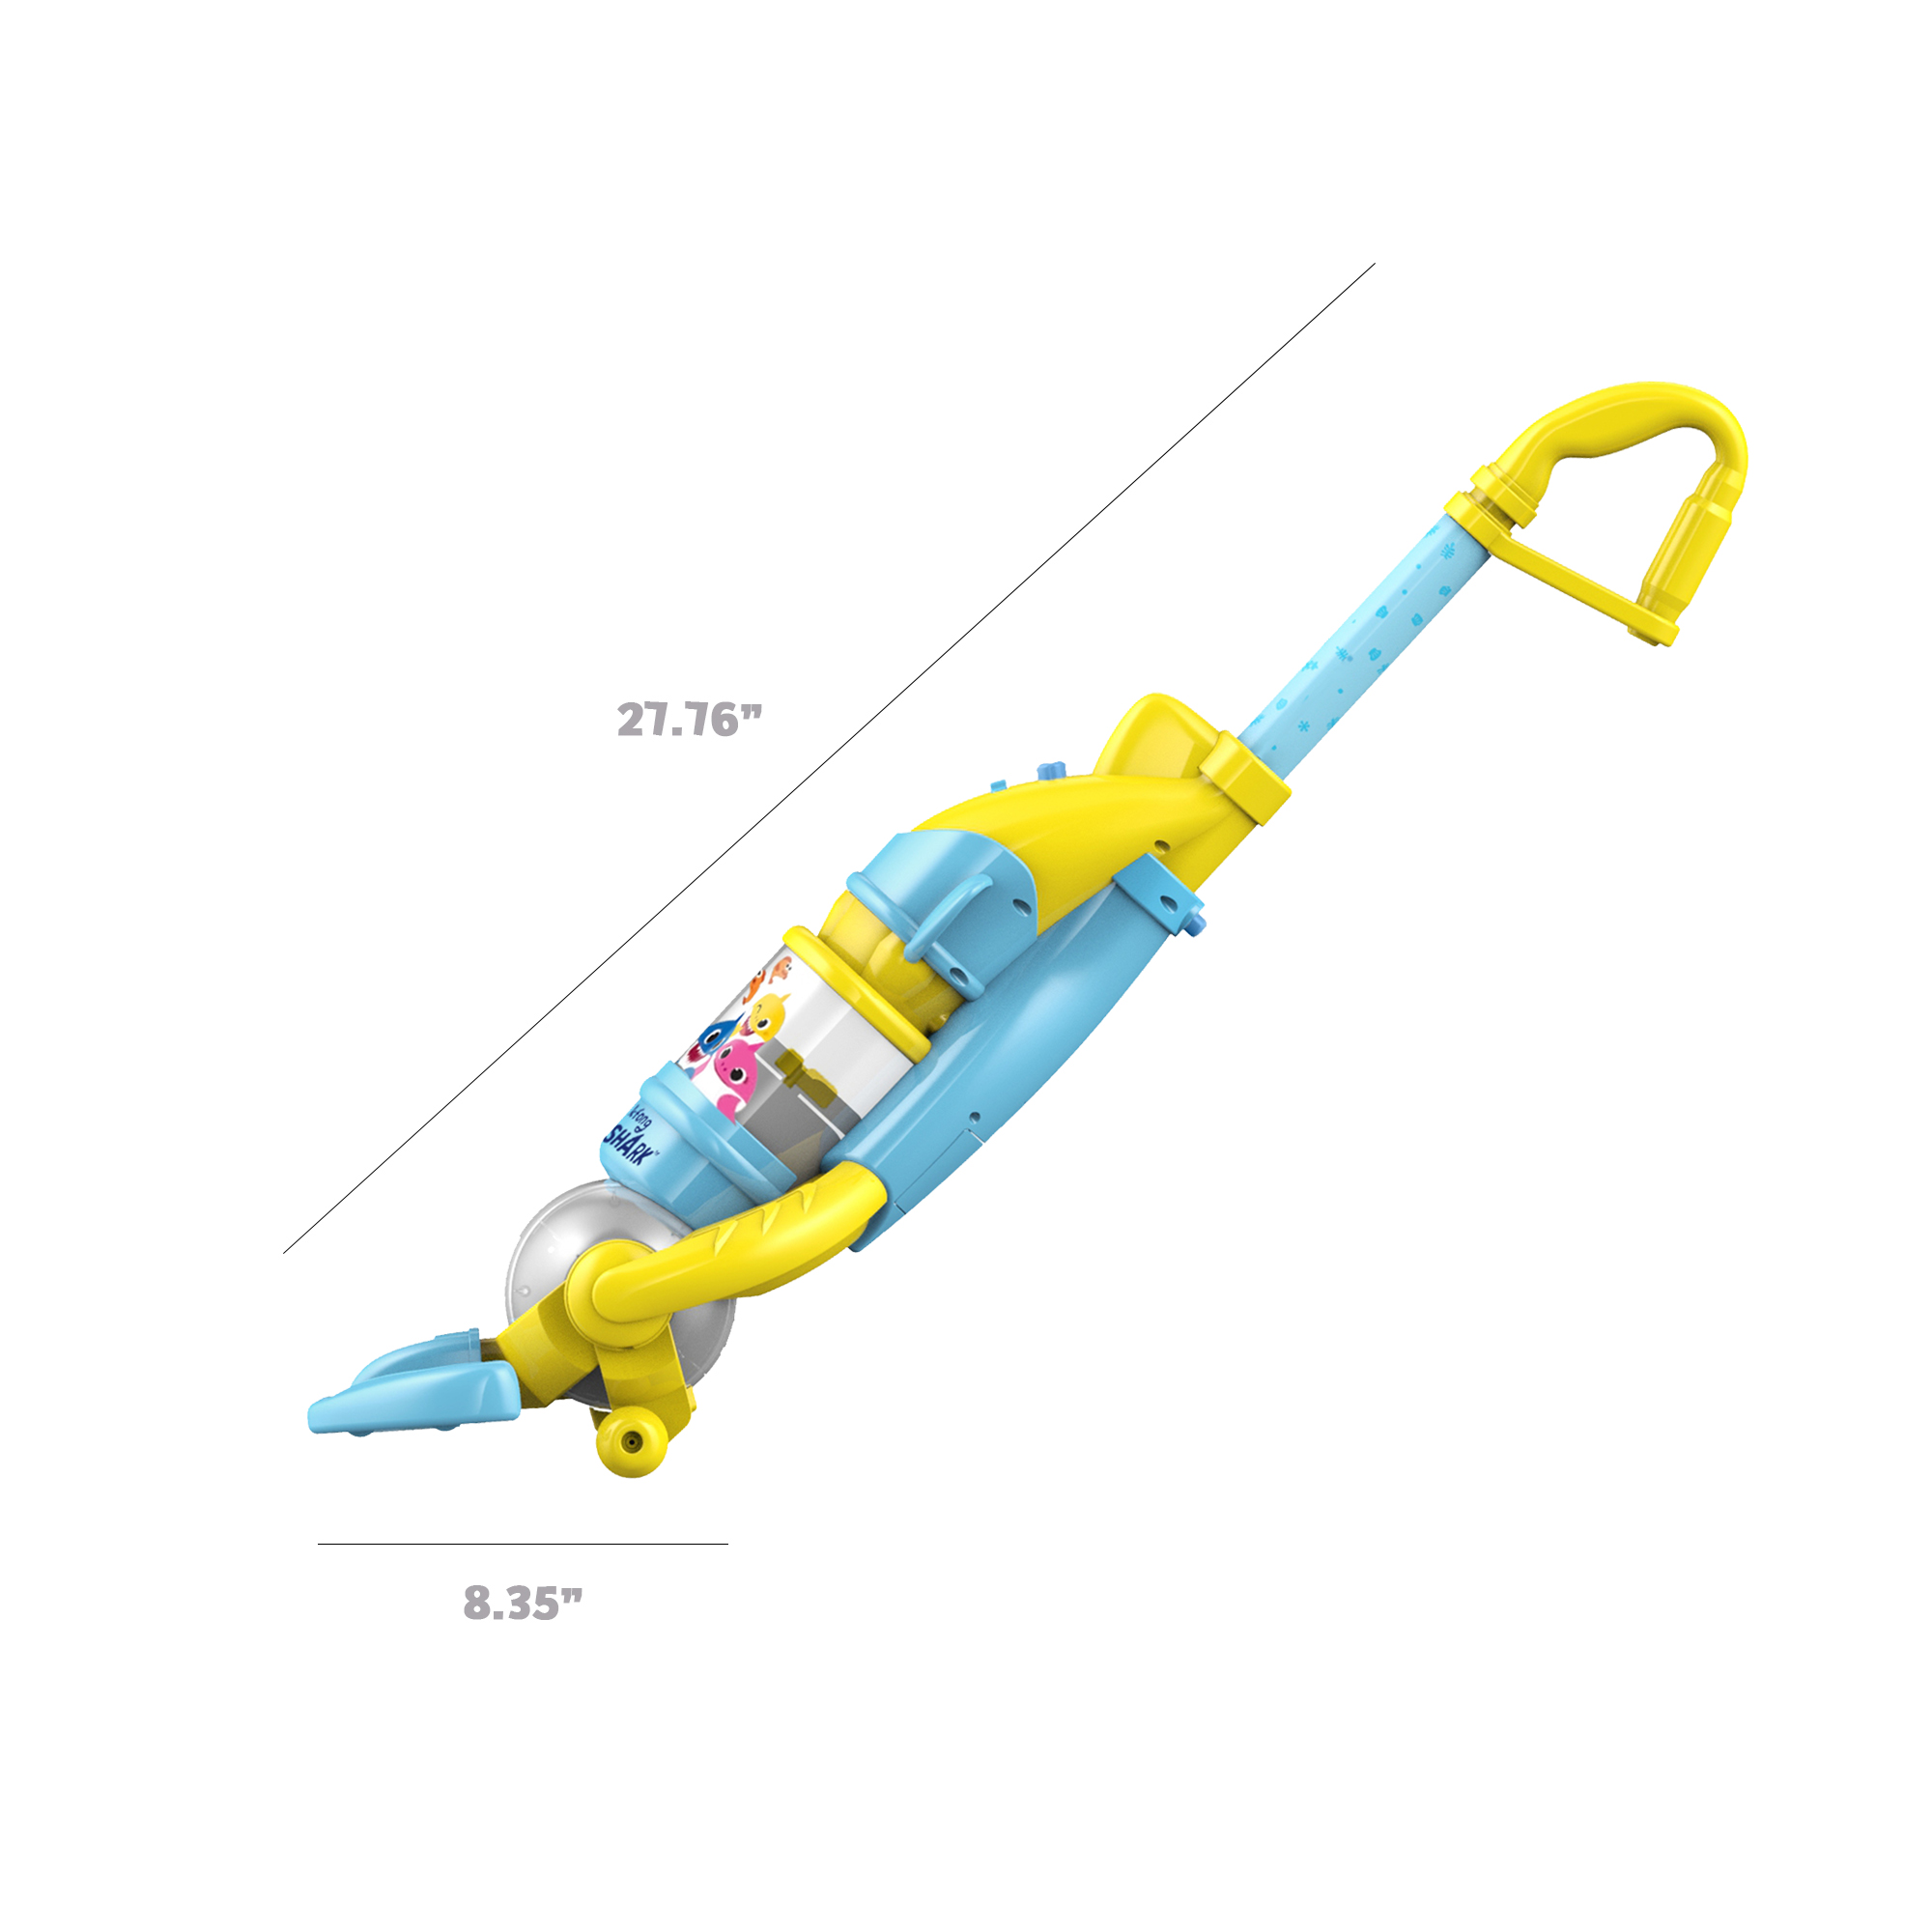 Pinkfong Baby Shark Children's Cordless Vacuum with Real Suction Powe for Hard Floor and Carpet - image 5 of 10